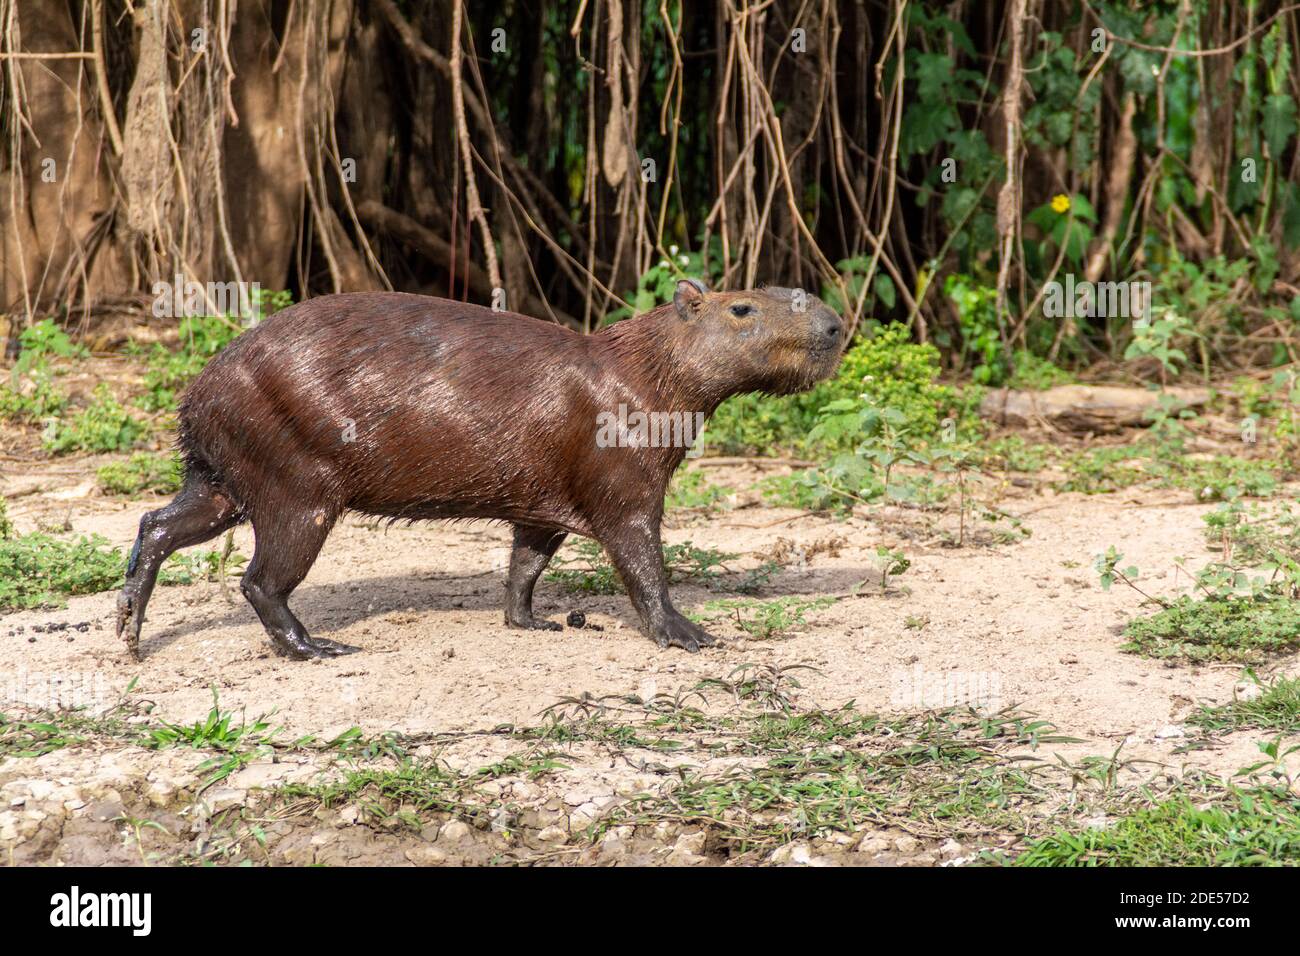 A lone Capybara, the world's largest rodent, swimming towards a bank on the Mutum River, (Rio Mutum) in the world's largest wetlands of the Pantanal Stock Photo